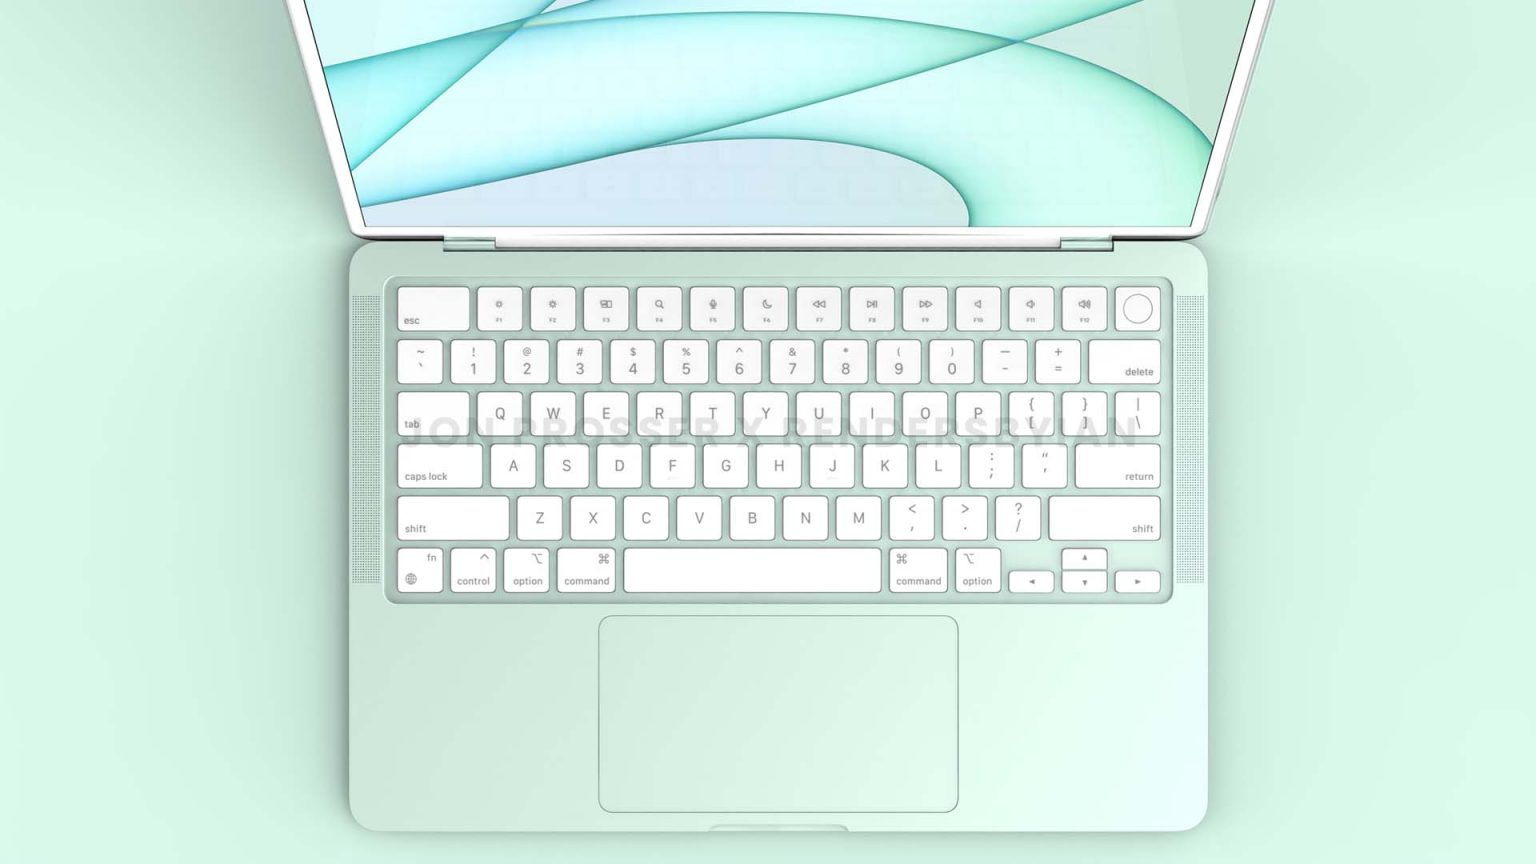 Apple reportedly plans to release new laptops in colors that match the iMac lineup.